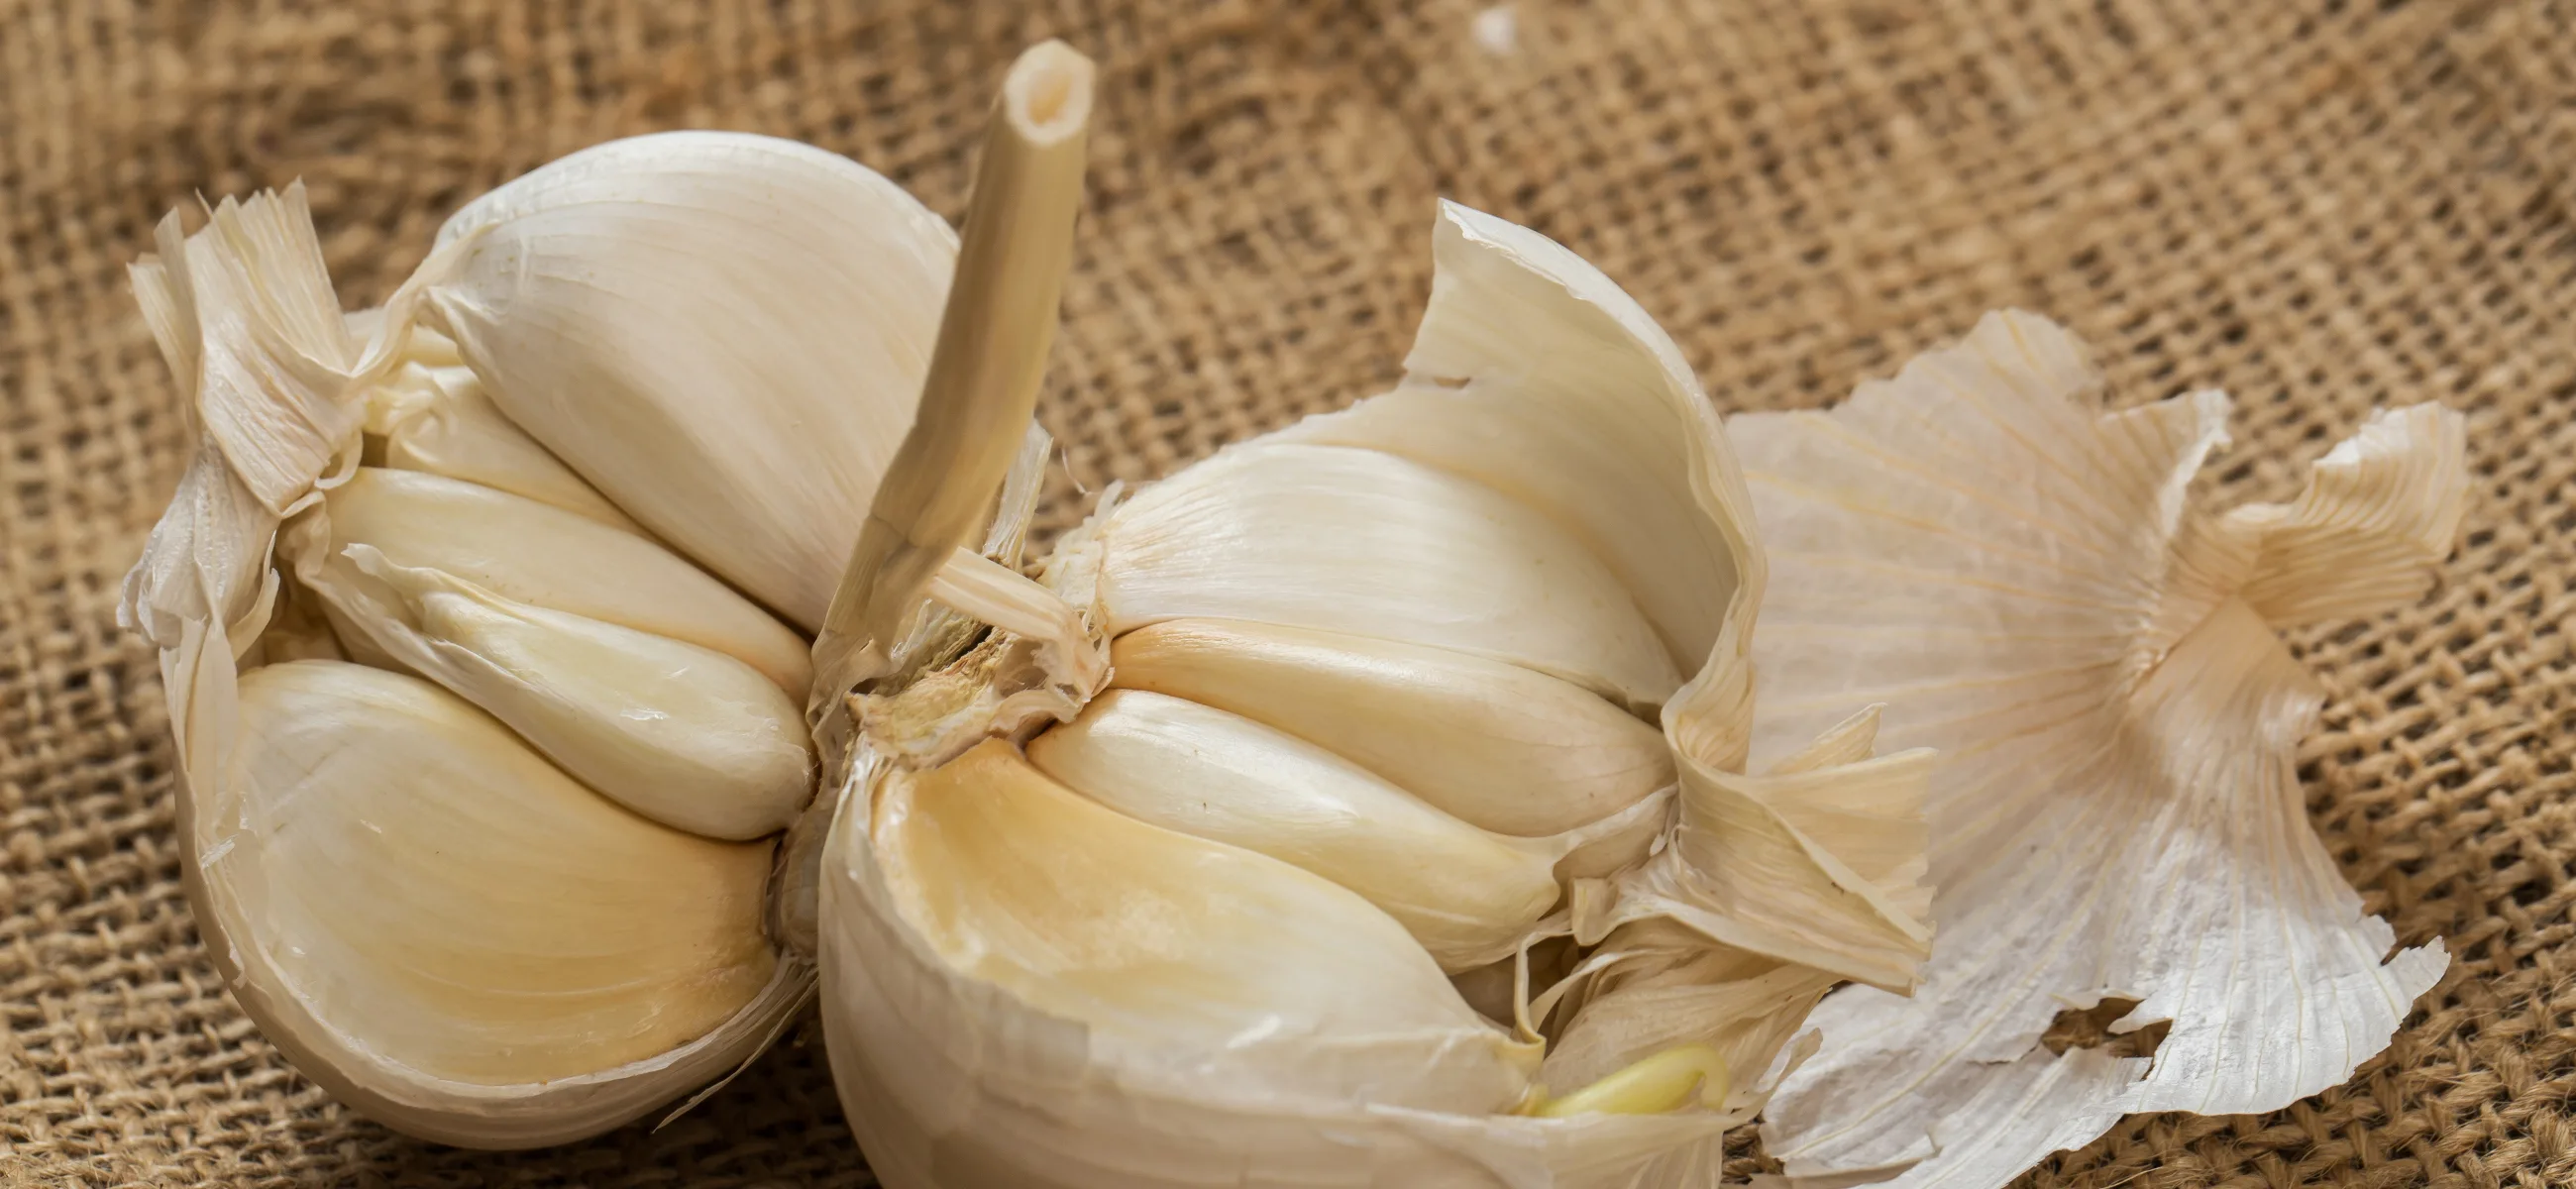 Garlic breath: 6 best natural and instant methods to get rid of it